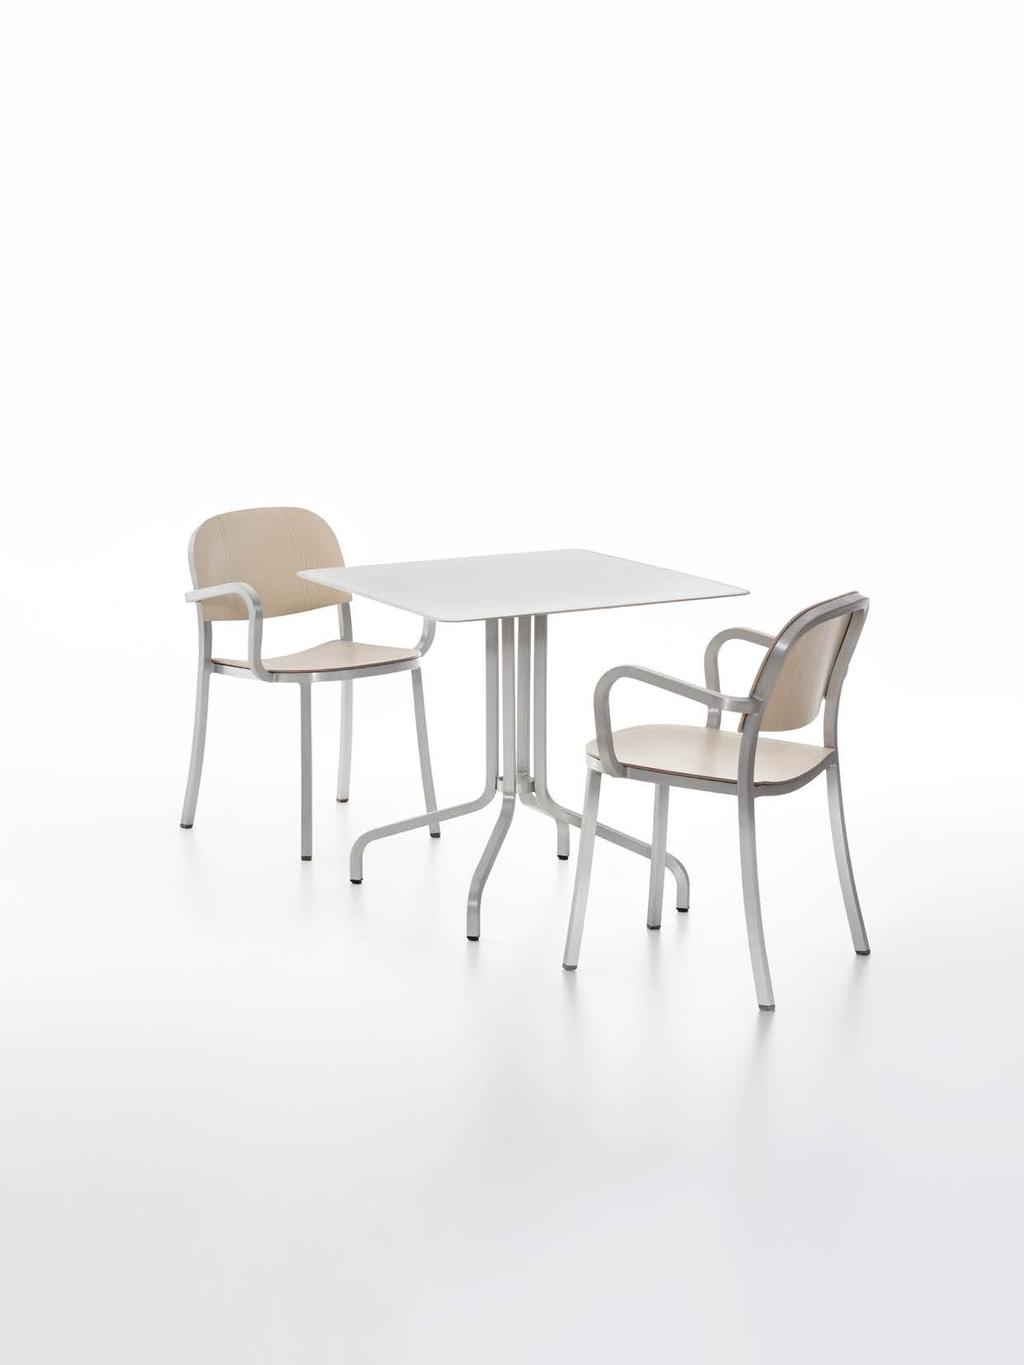 The 1 Inch collection features round and square tables in two heights; café and bar tables.